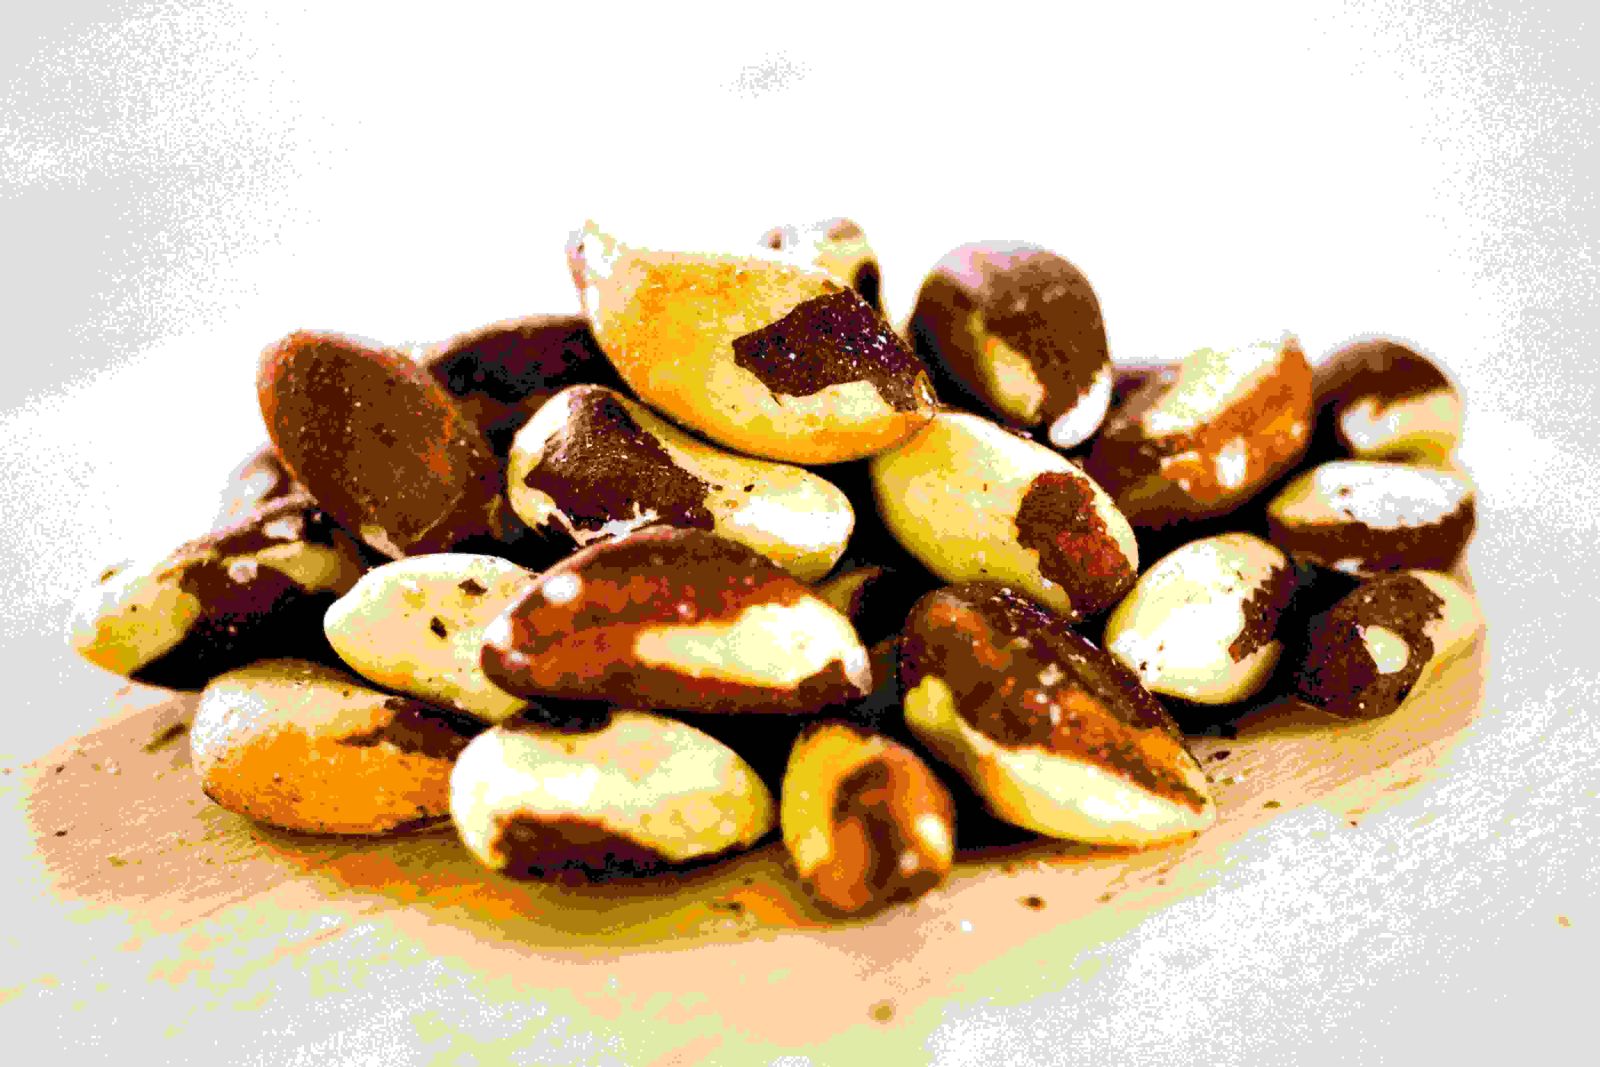 Health Benefits of Brazil Nuts